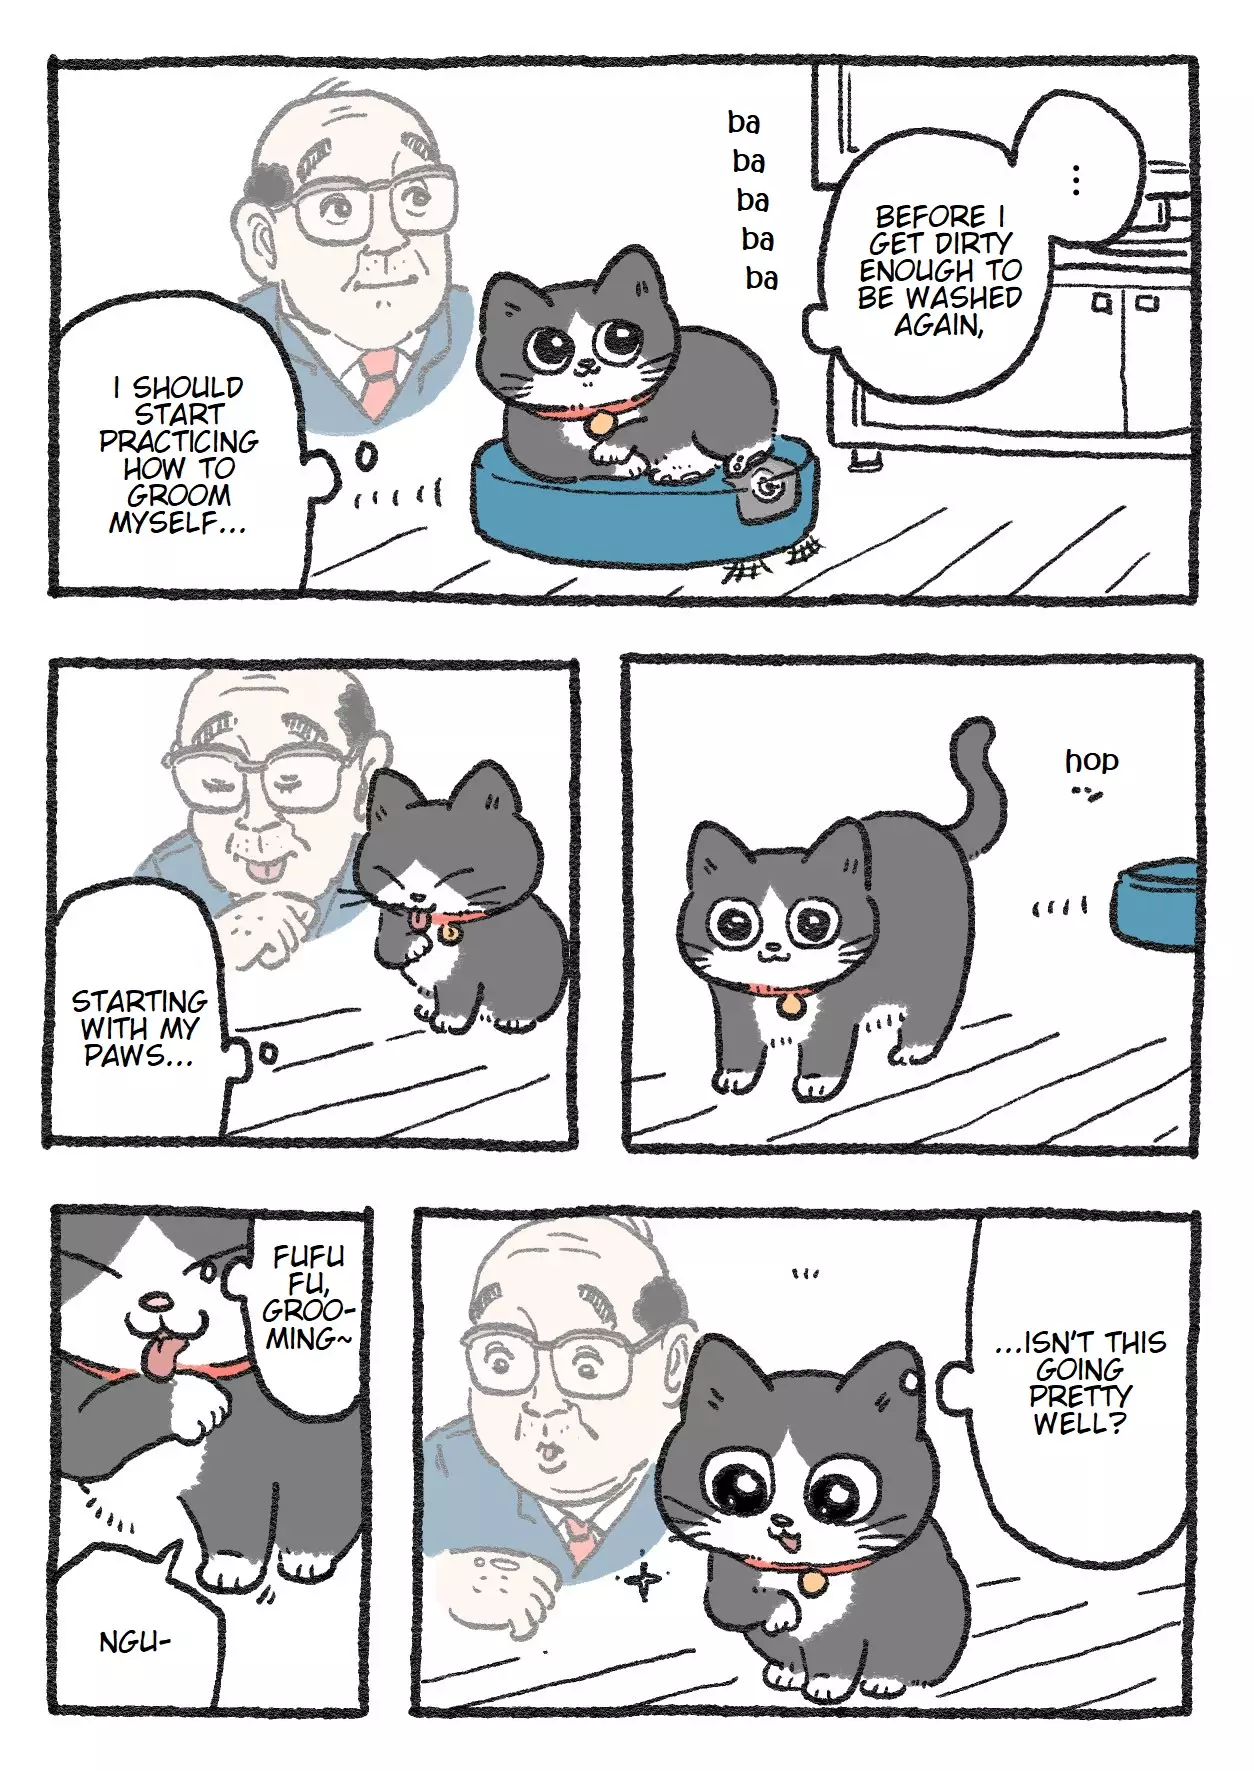 The Old Man Who Was Reincarnated As A Cat - 76 page 1-8c2f5388